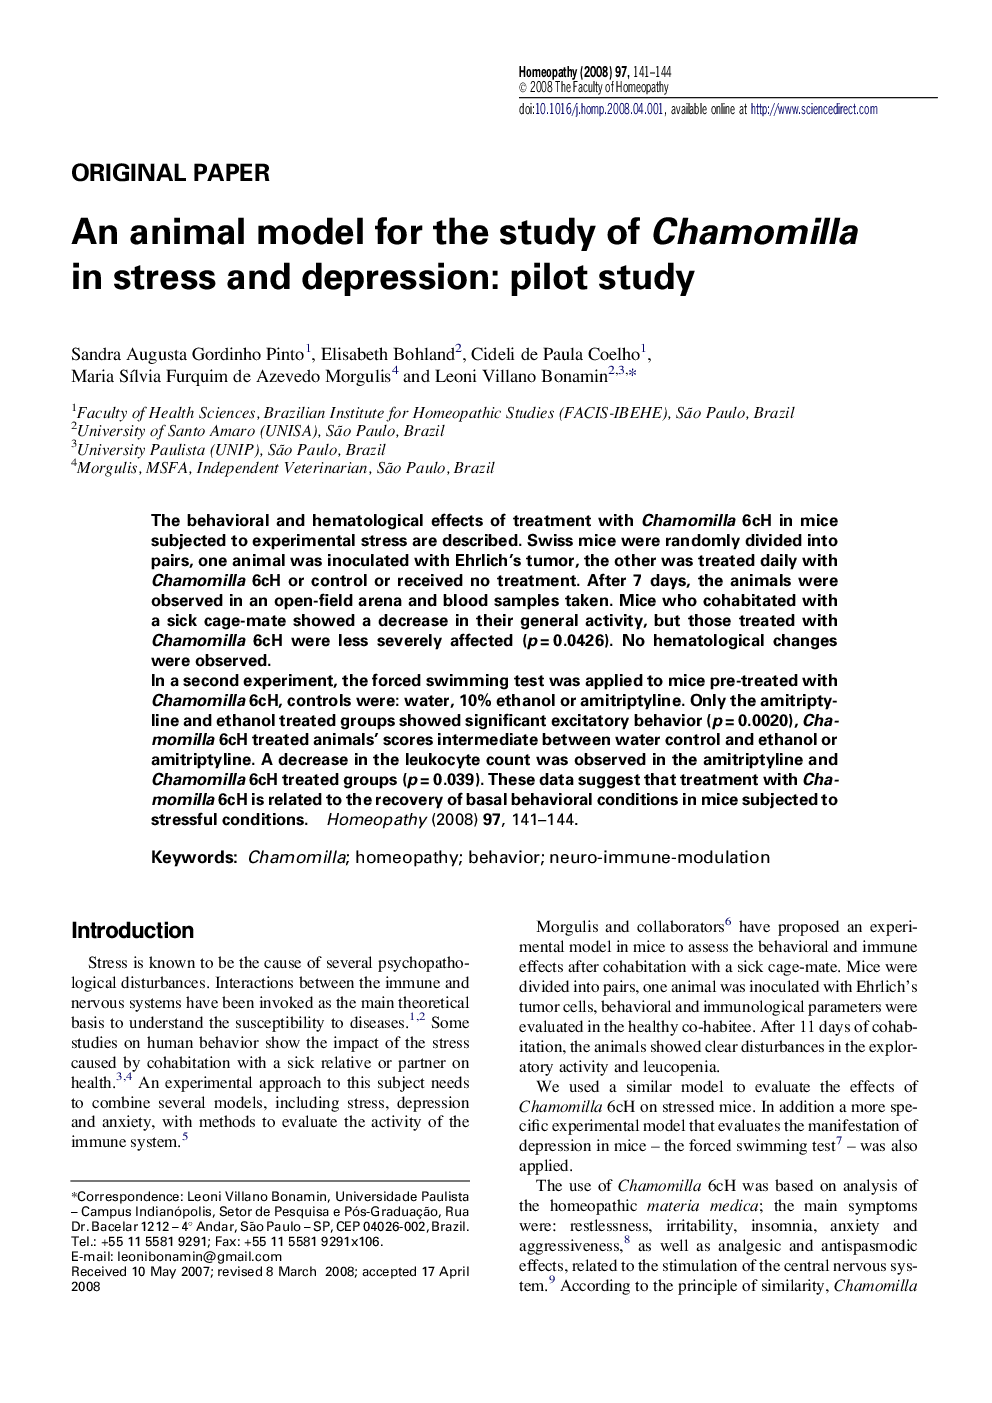 An animal model for the study of Chamomilla in stress and depression: pilot study